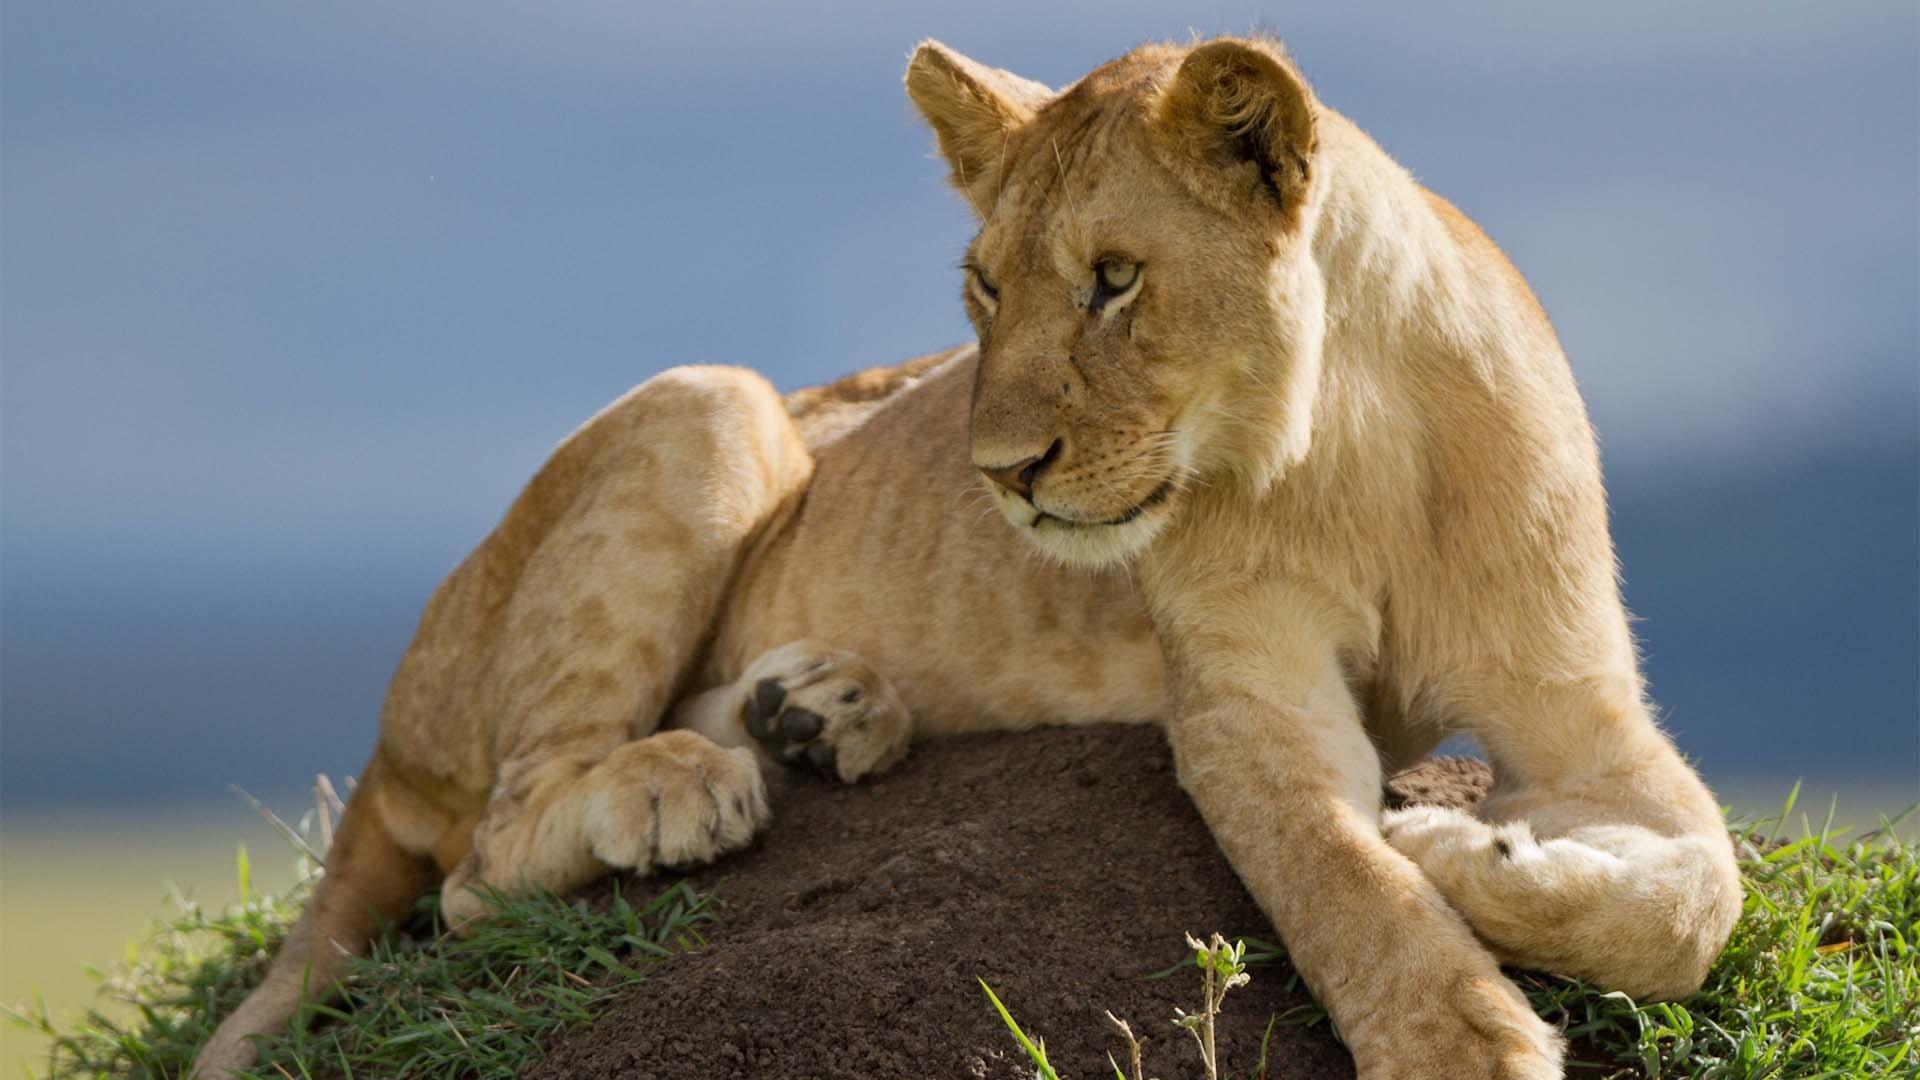 Closeup image of Alan, a lion from the Marsh Pride.